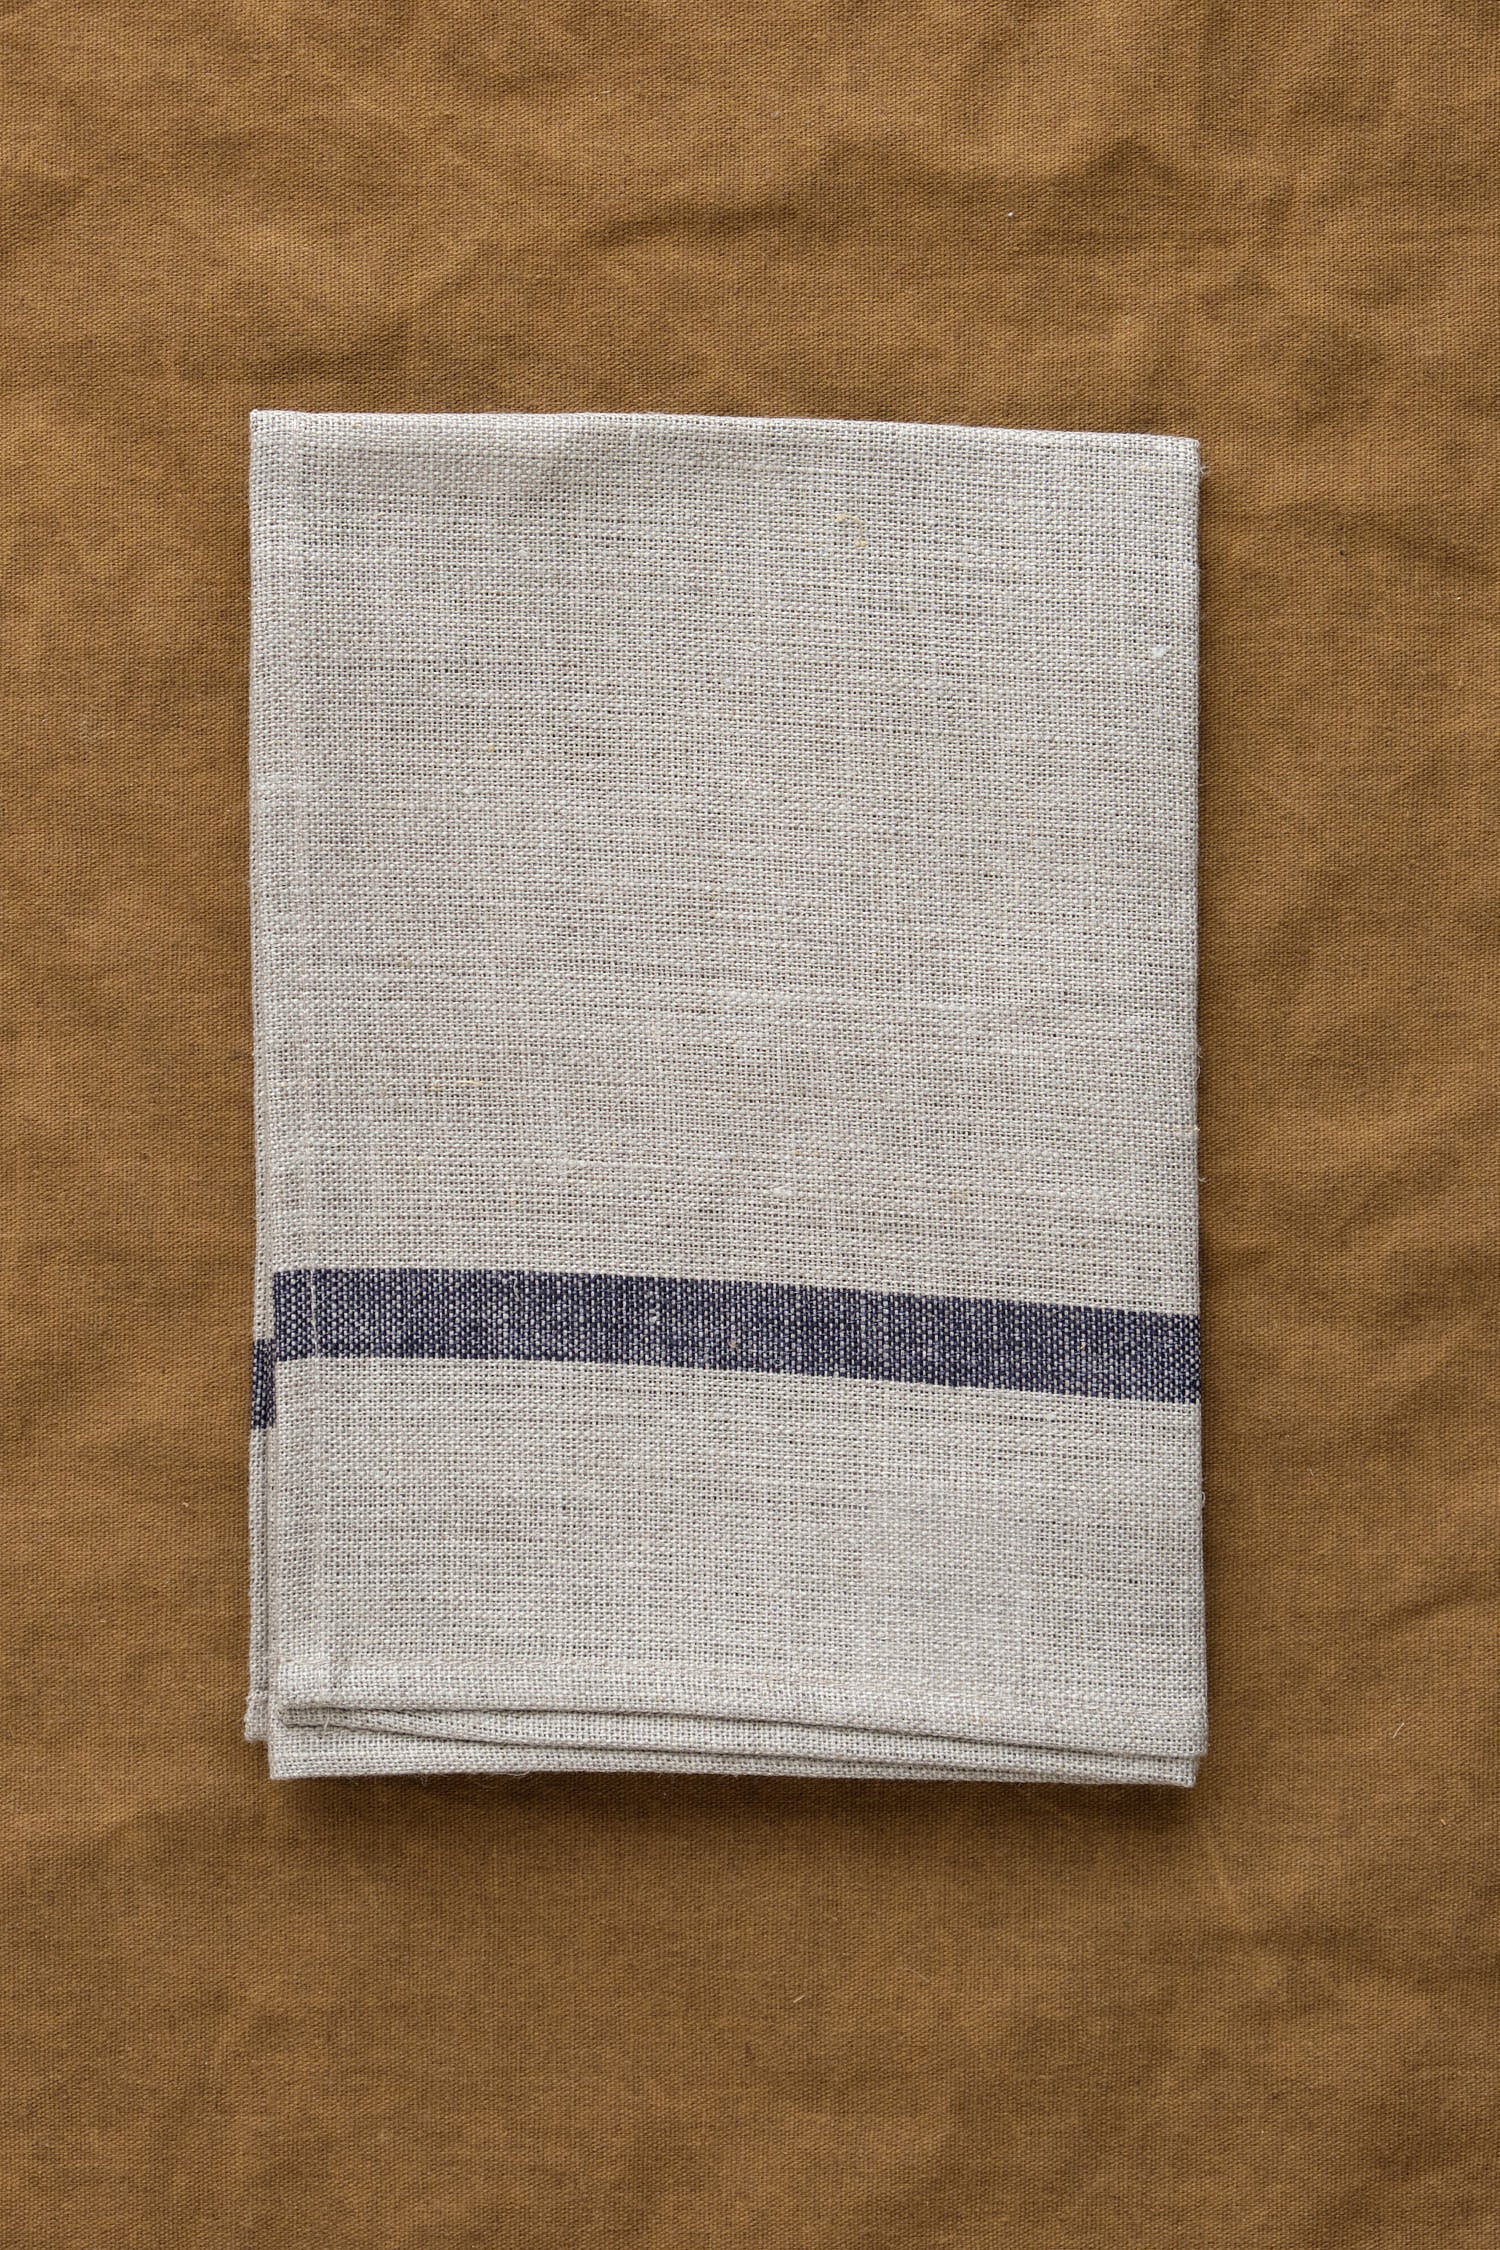 Thick Linen Kitchen Cloth on table